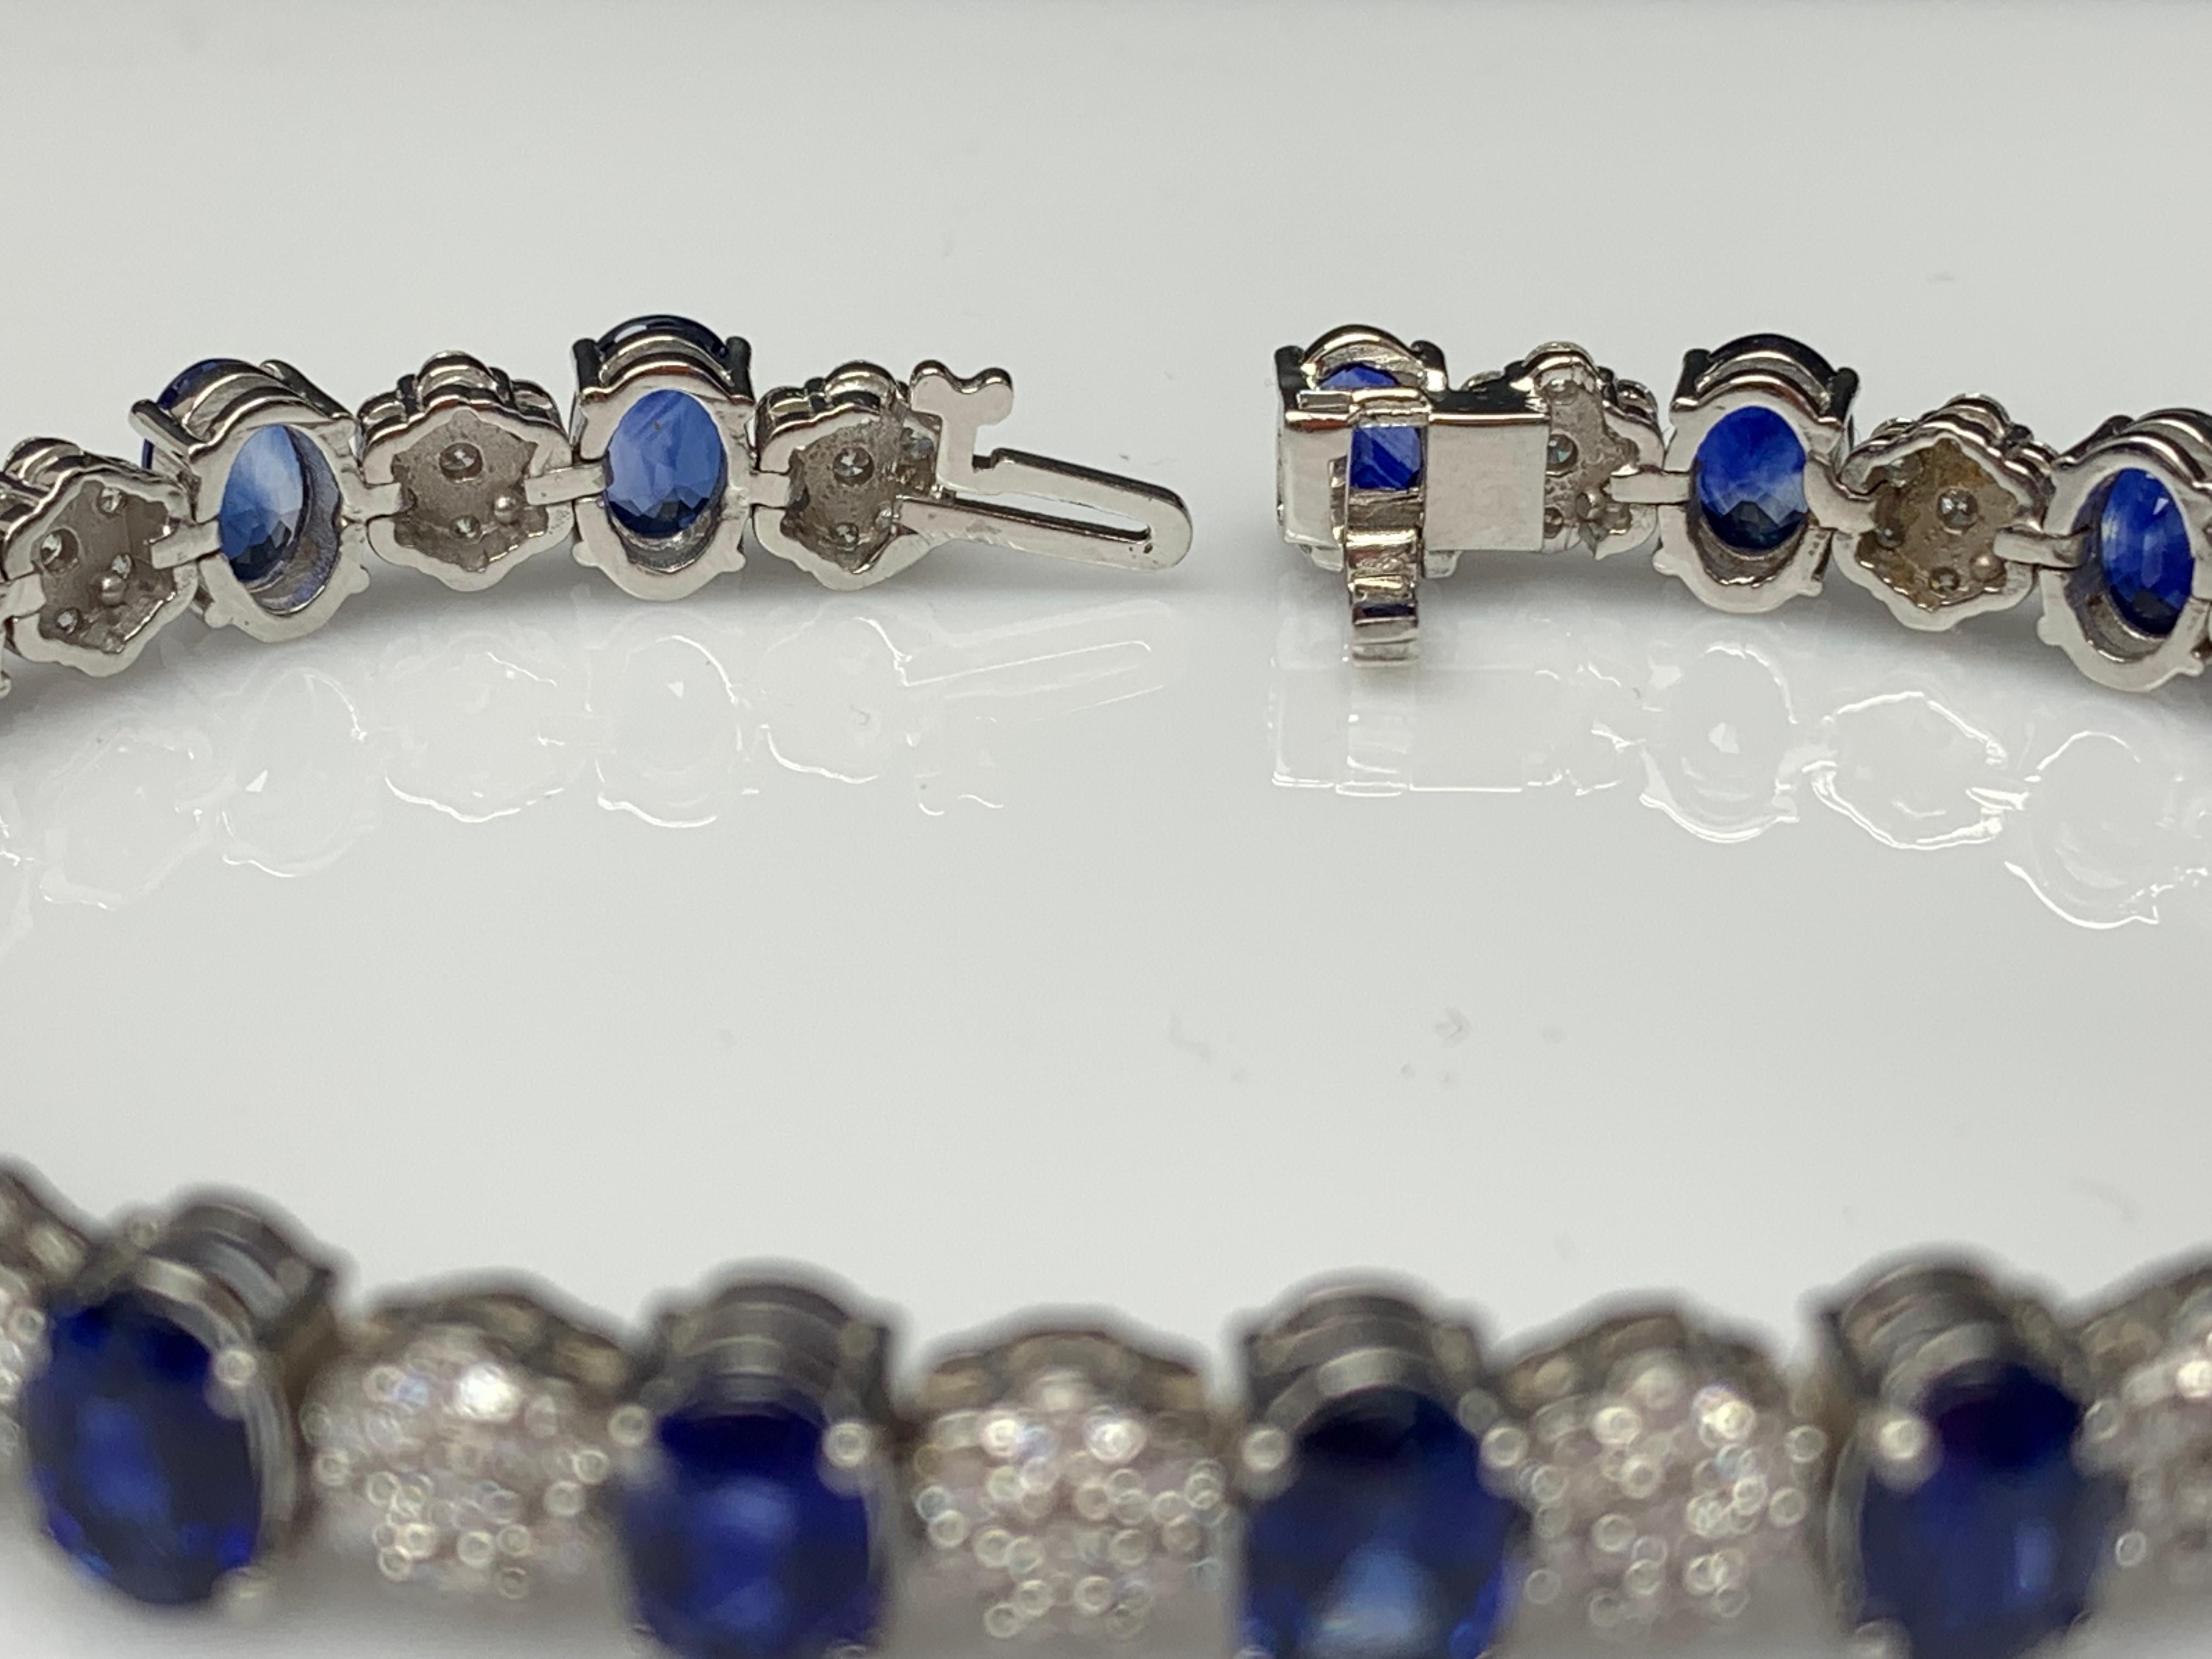 15.26 Carat Oval Cut Blue Sapphire and Diamond Tennis Bracelet in 14K White Gold For Sale 7